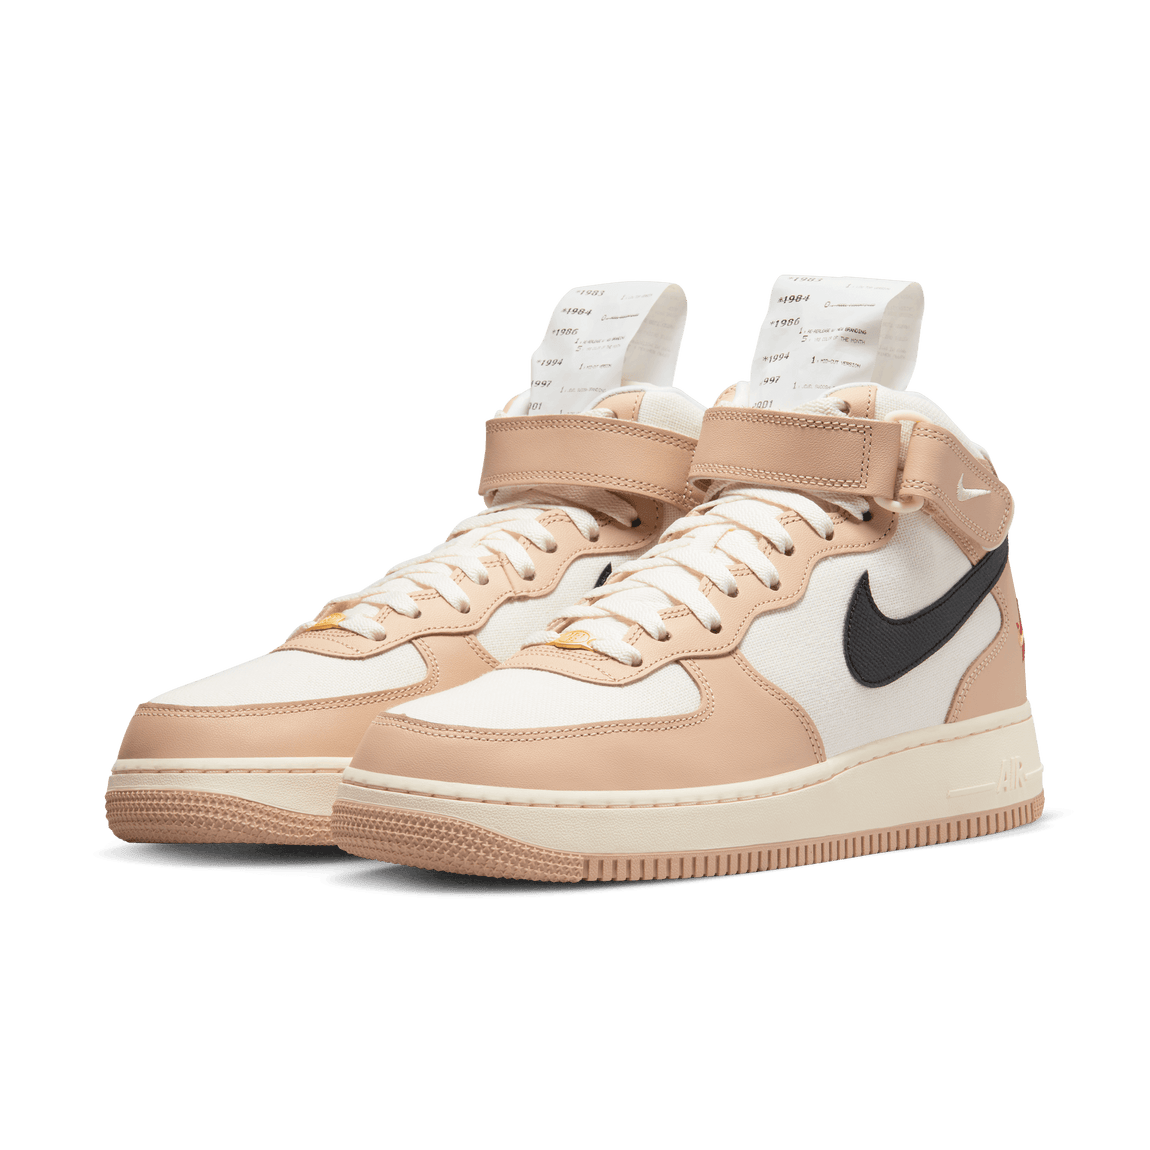 Nike Air Force 1 Mid '07 LX (Shimmer/Black/Pale Ivory-Coconut Milk) - Nike Air Force 1 Mid '07 LX (Shimmer/Black/Pale Ivory-Coconut Milk) - 